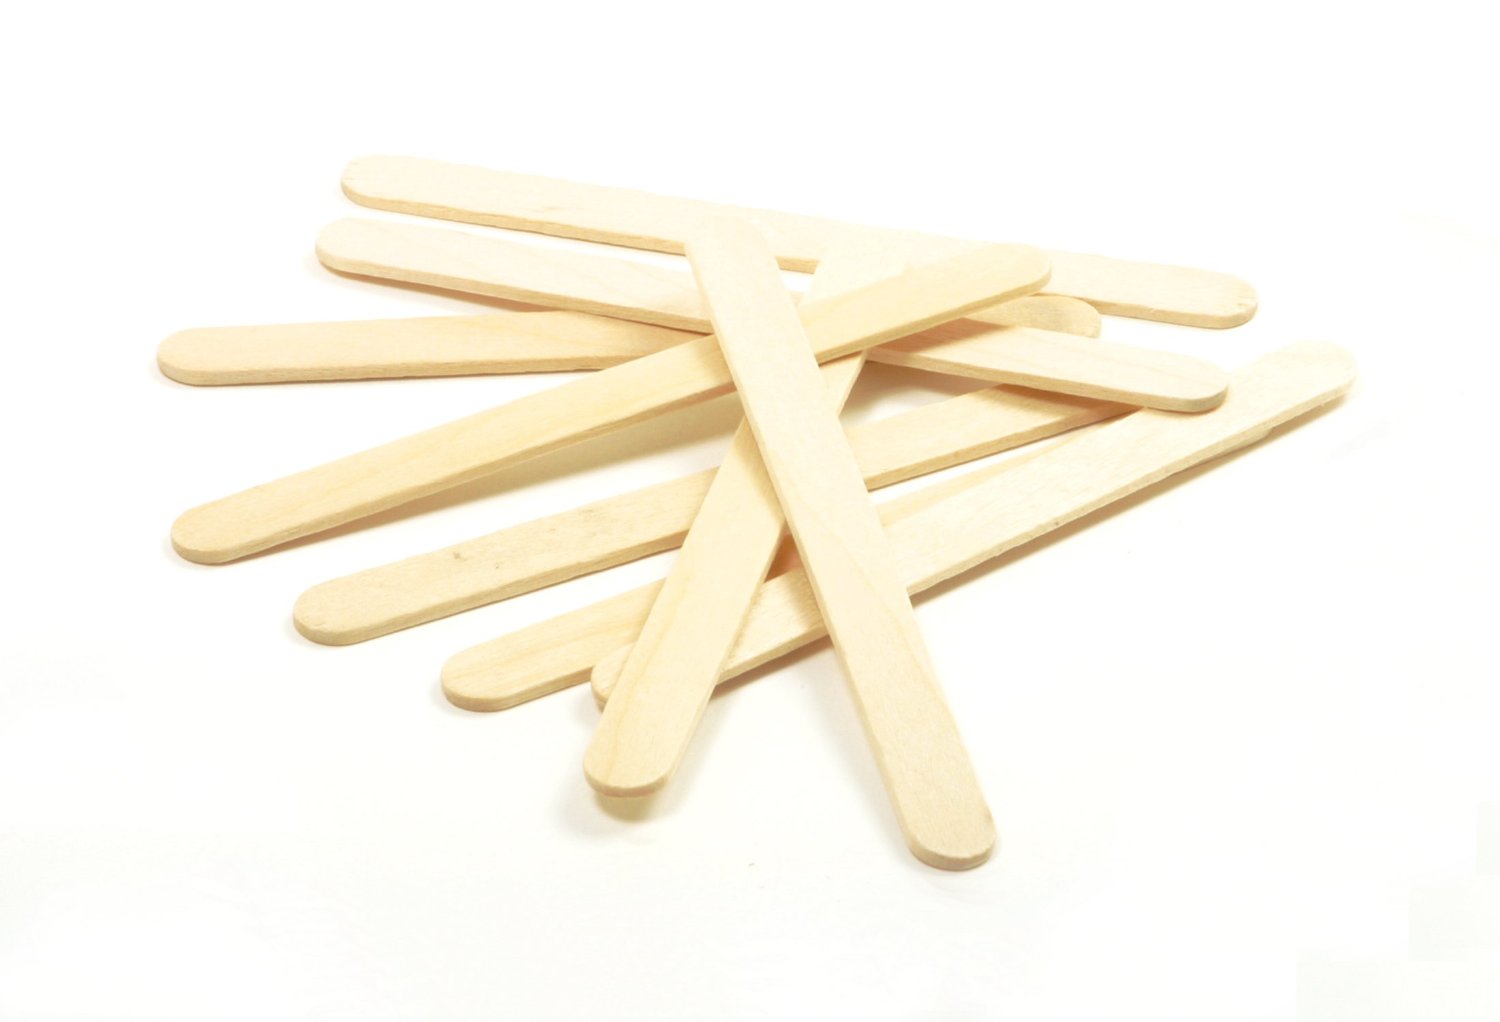 Popsicle sticks in a pile